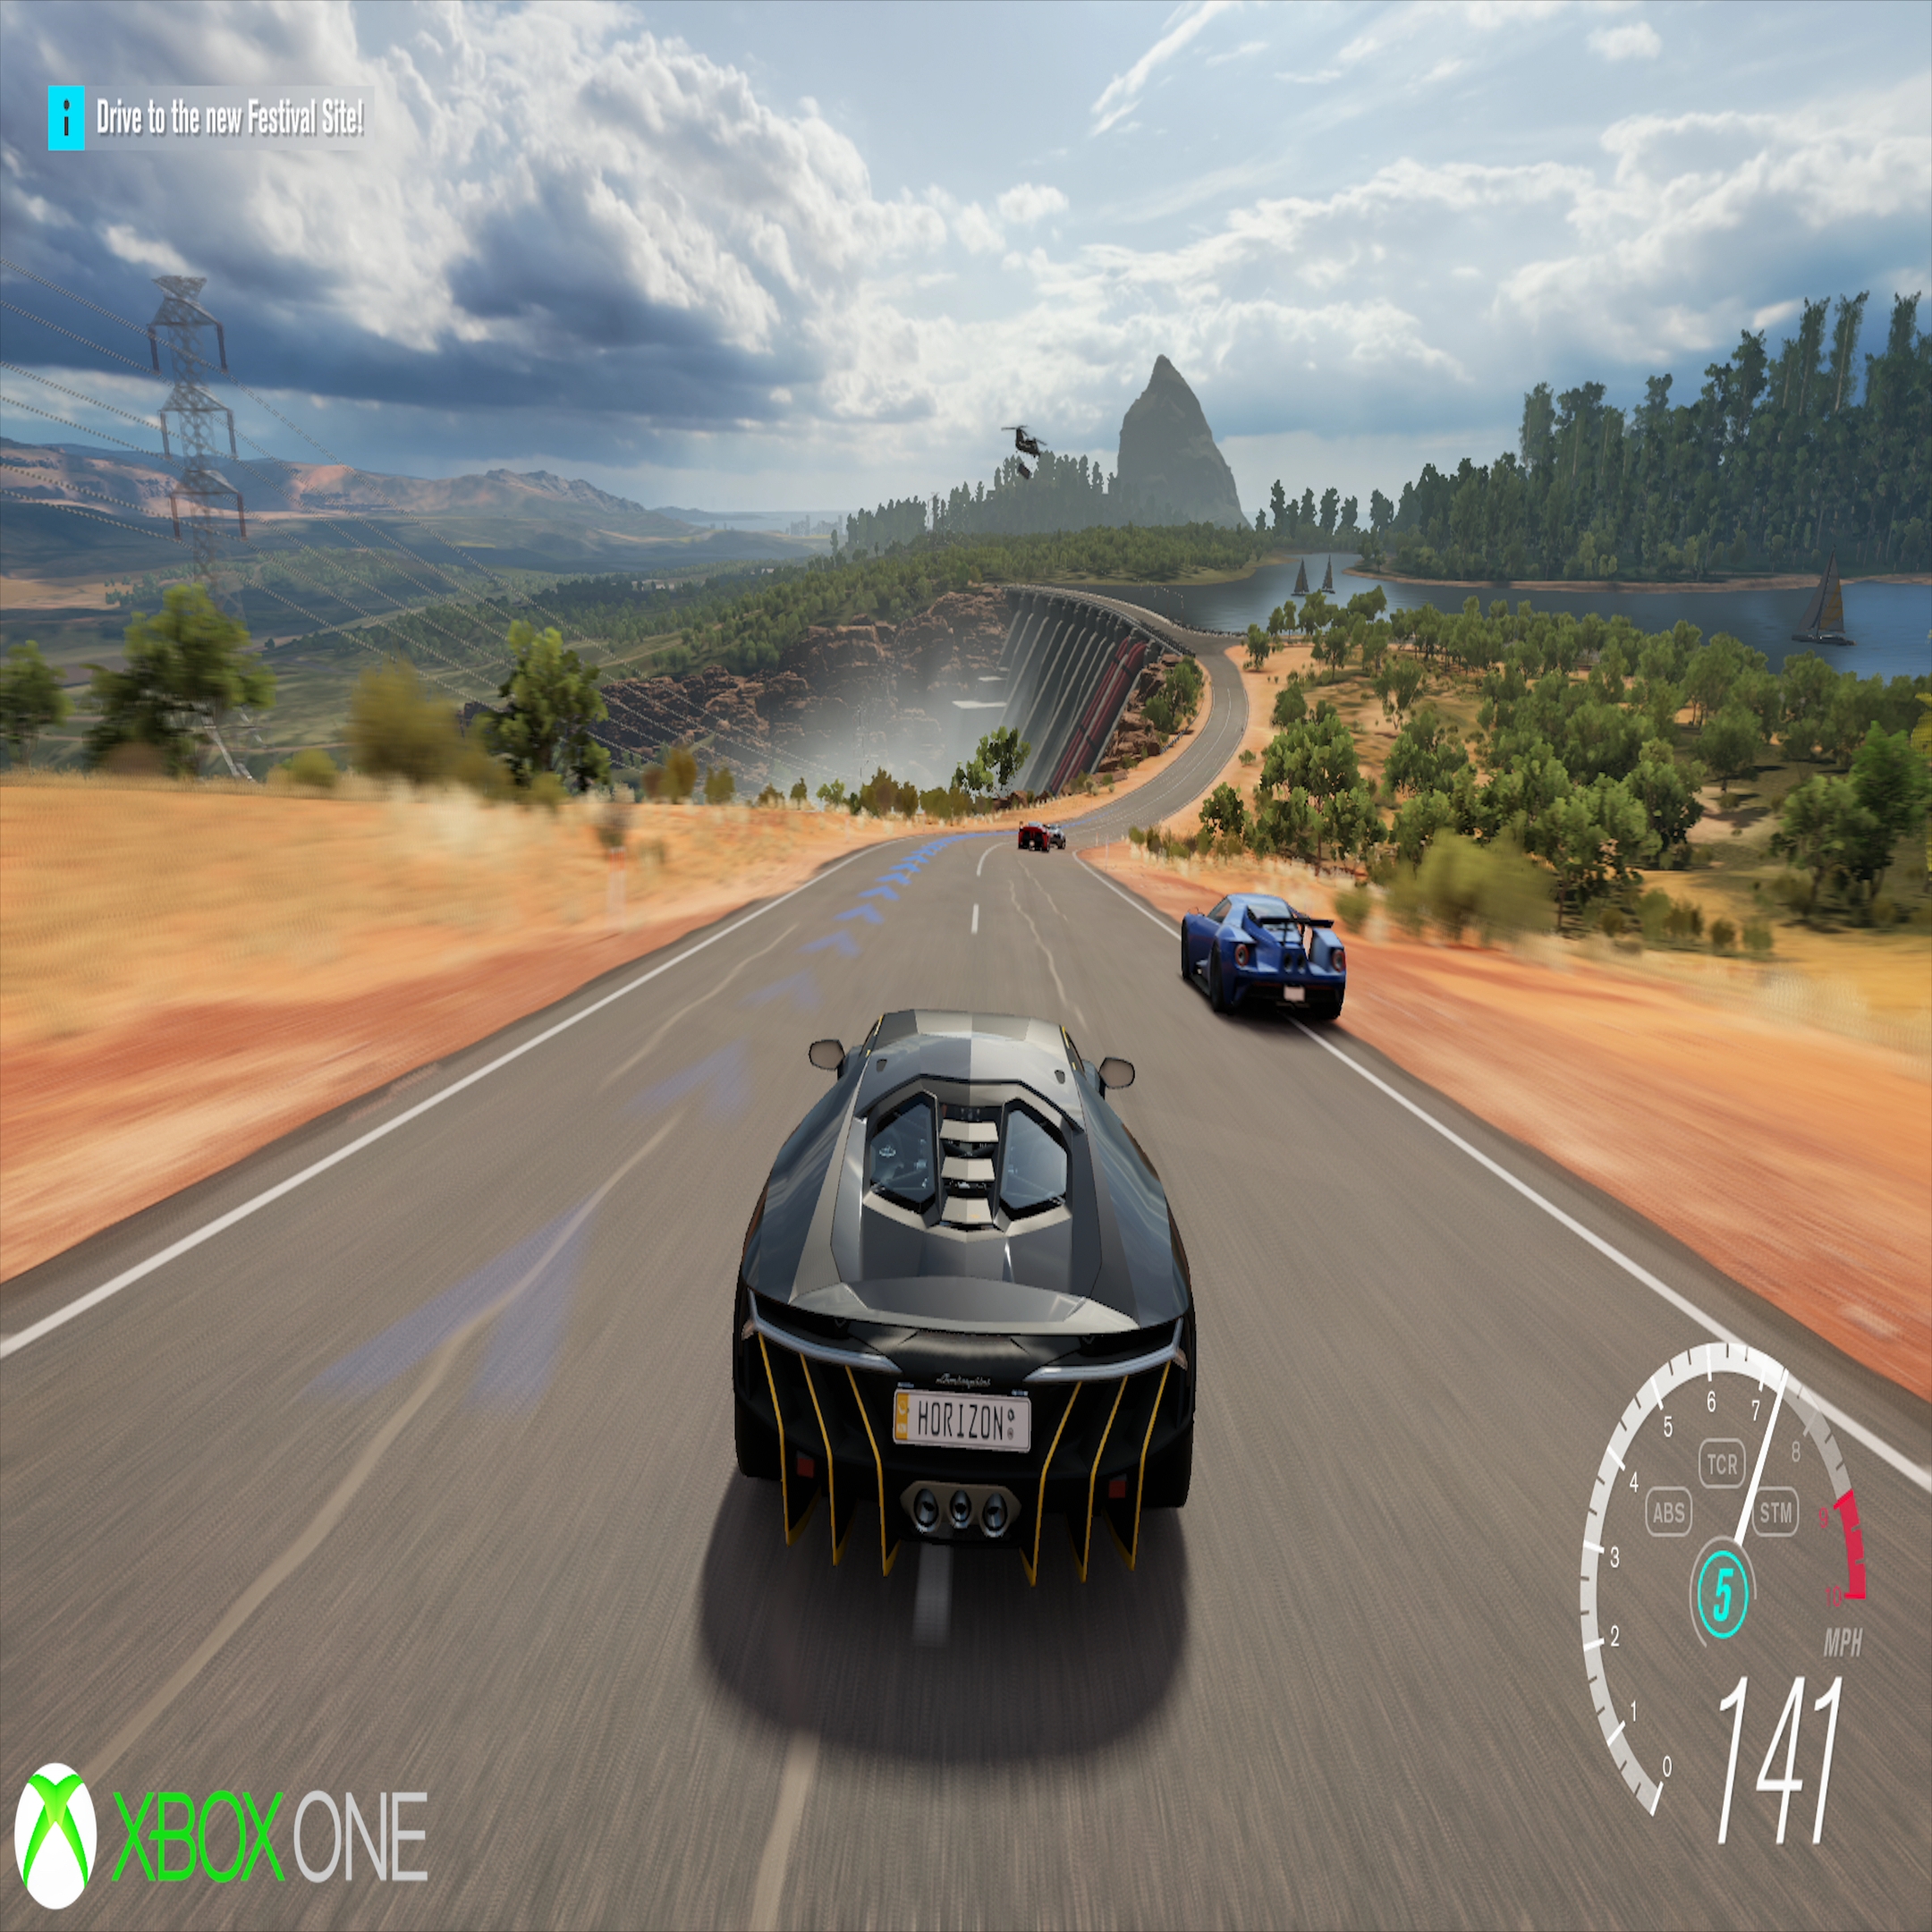 How Forza Horizon 3 became the most beautiful game on Xbox